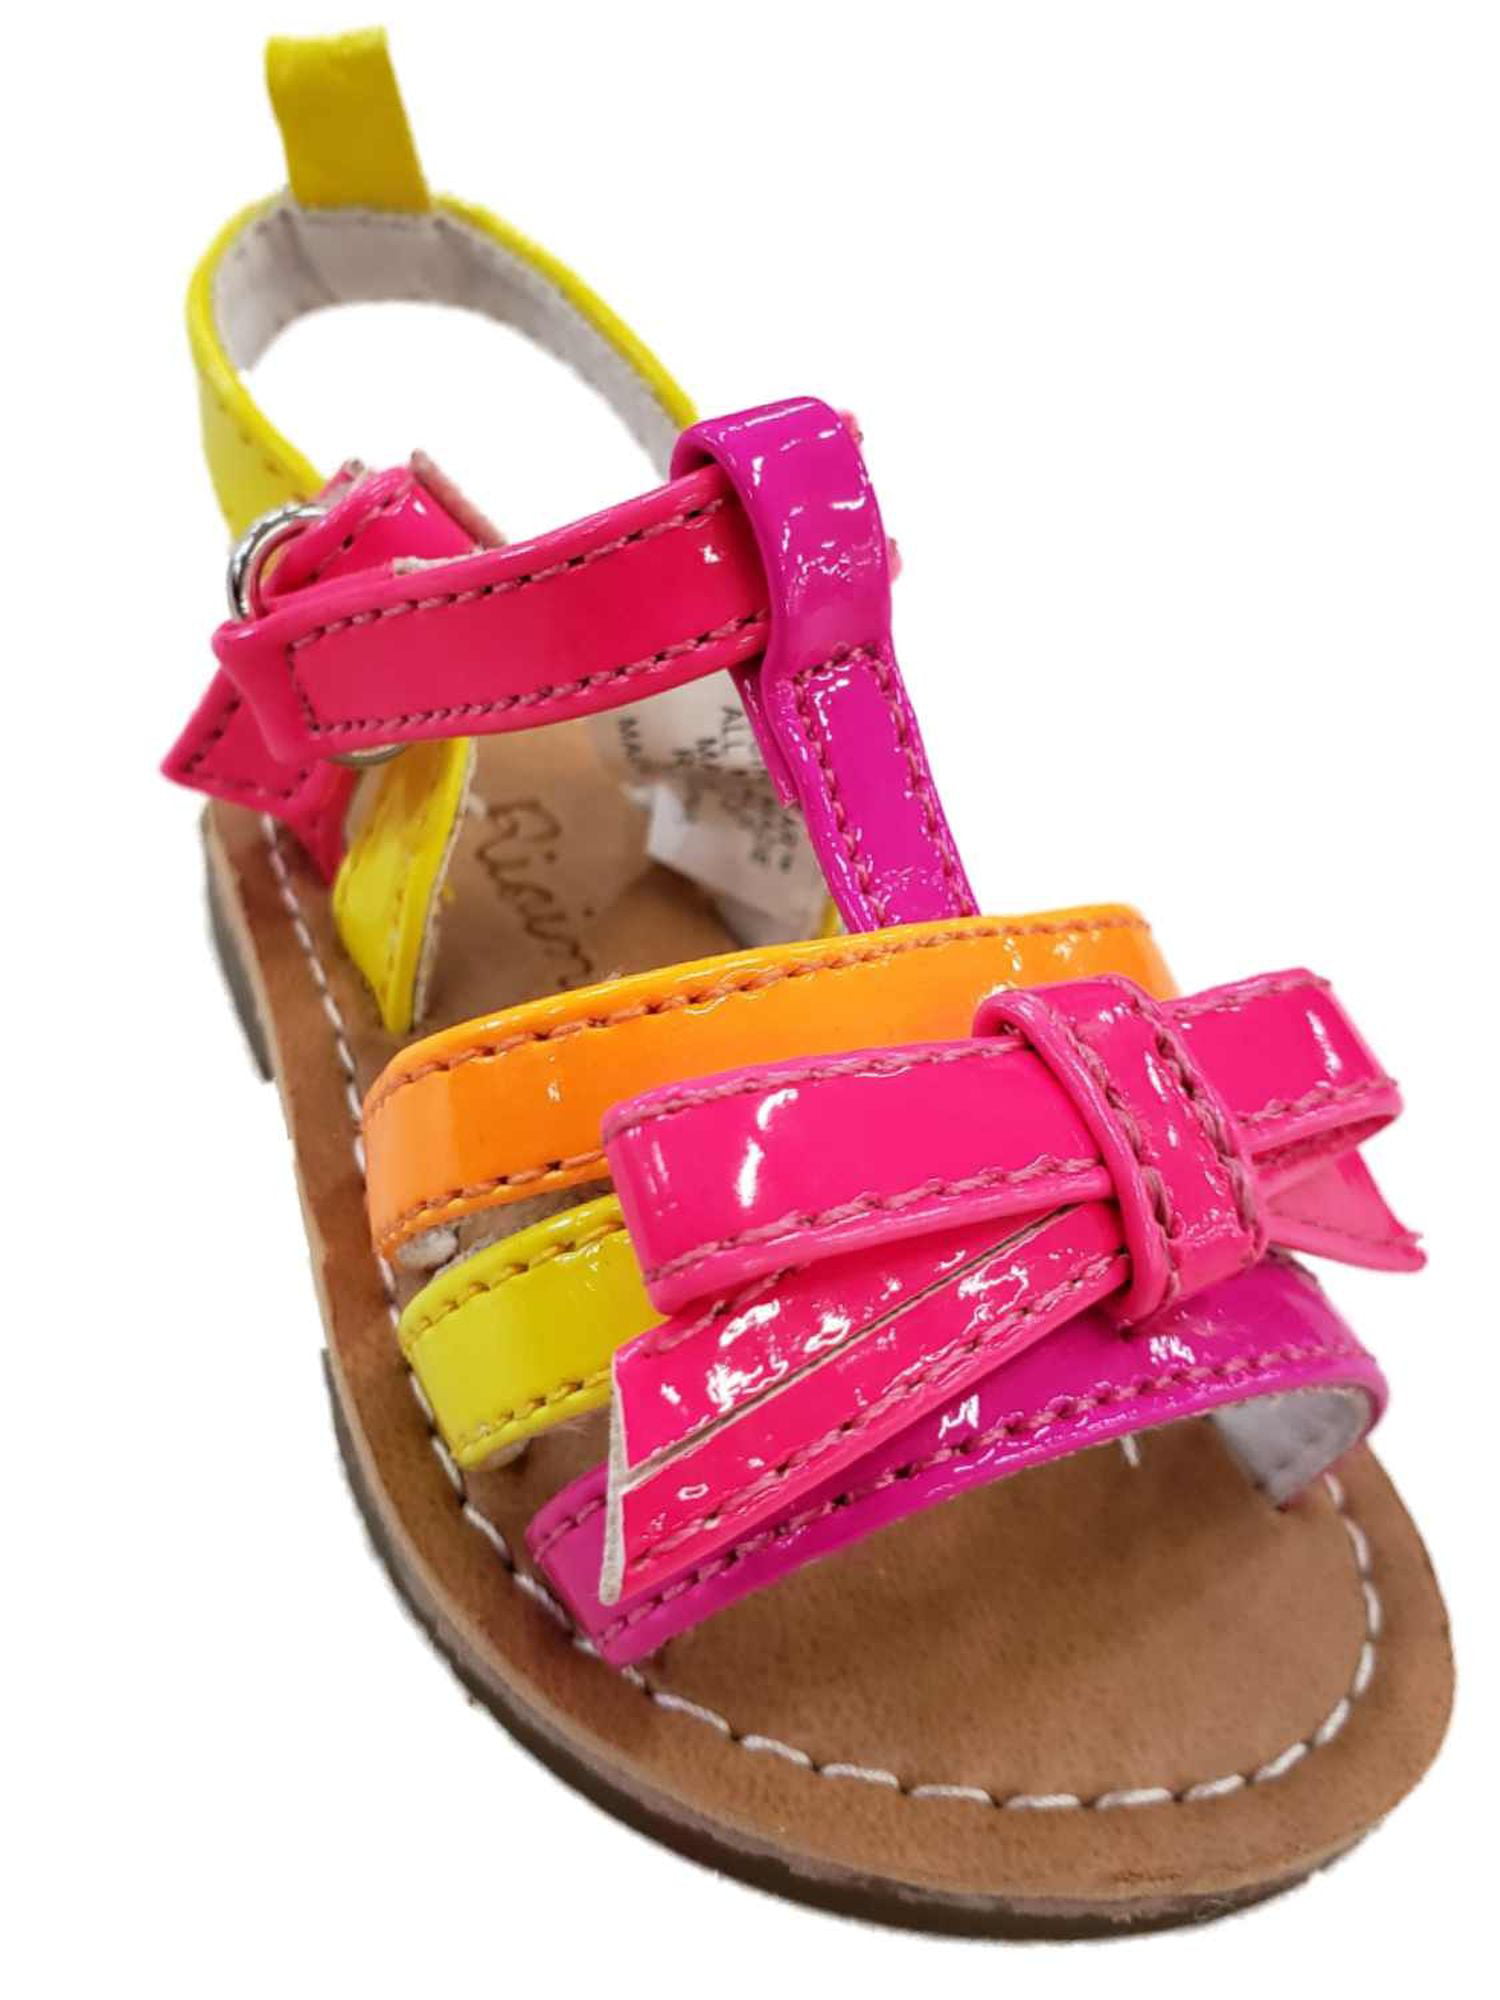 GIRLS HOT PINK GLADIATOR SANDALS STRAPPY OPEN-TOE HOLIDAY SHOES KIDS SIZES 10-3 